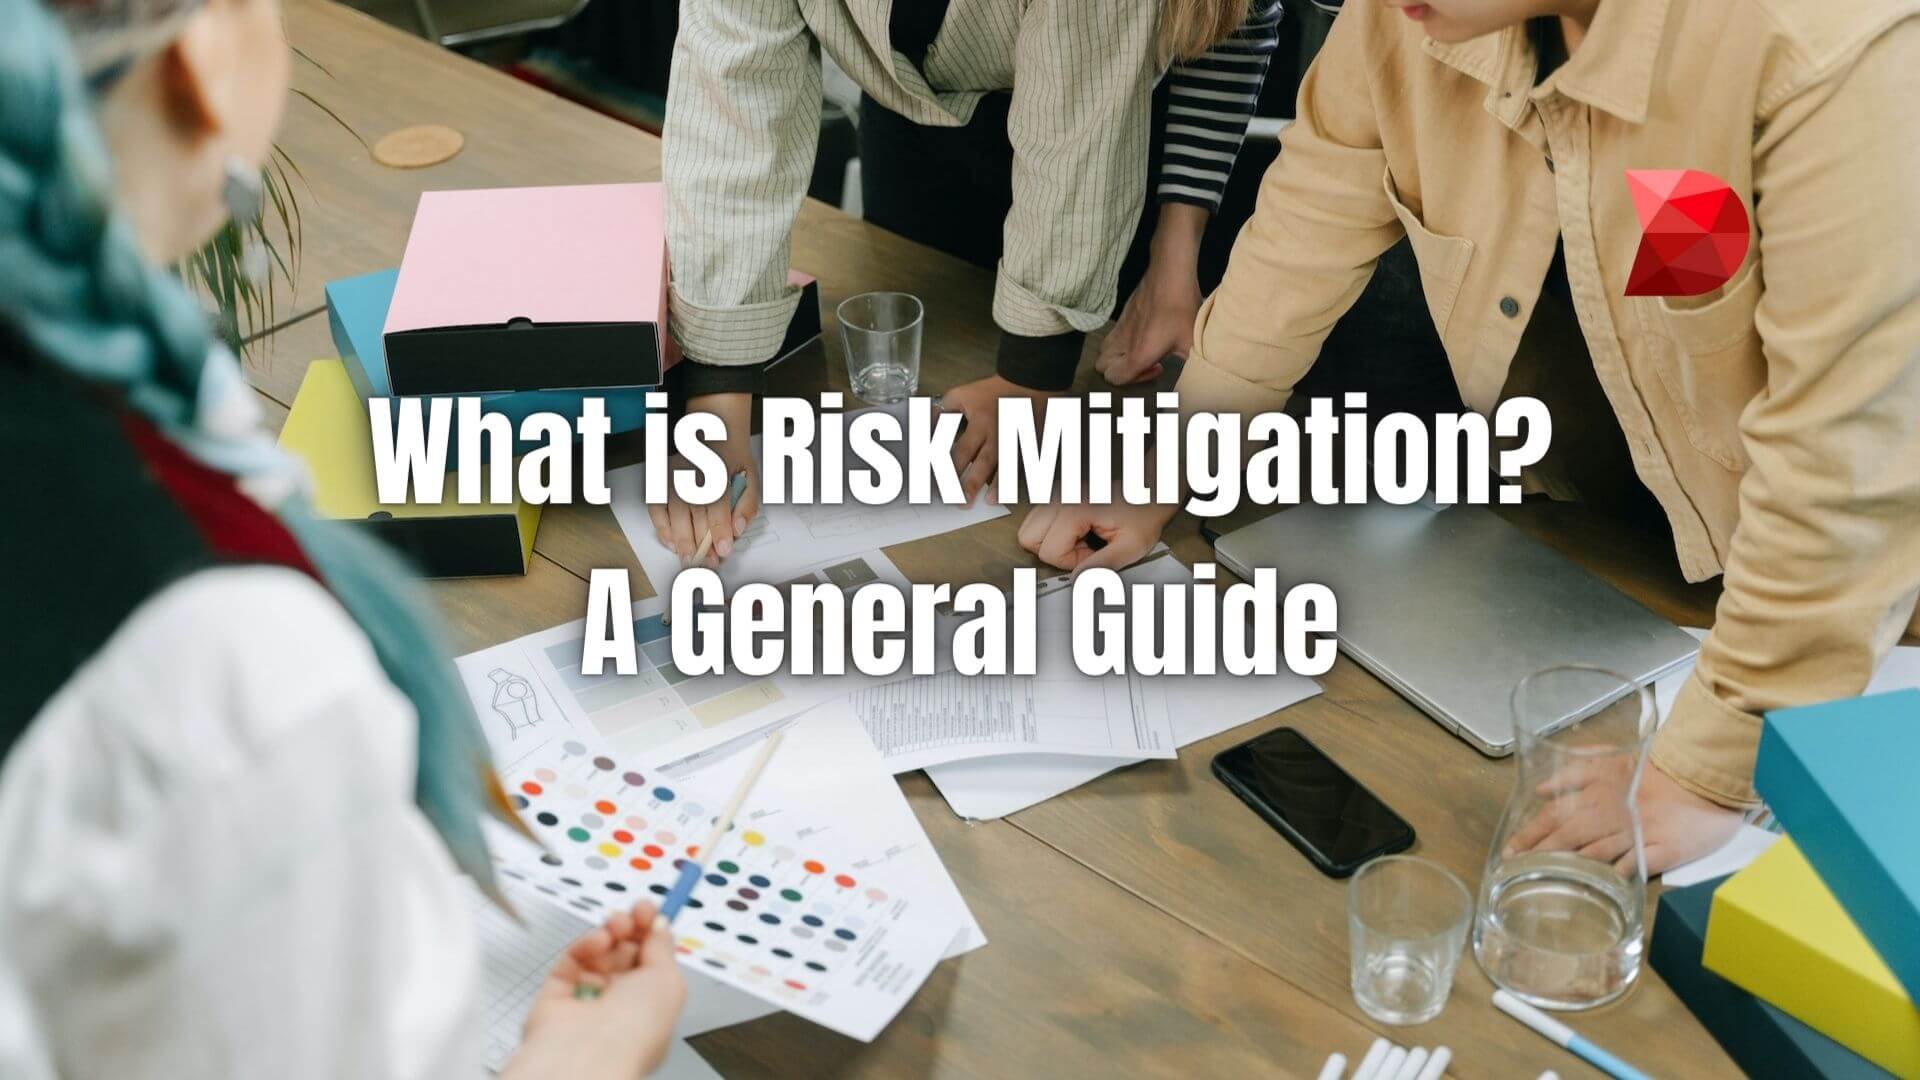 Risk mitigation is the process of identifying, assessing, and reducing risk exposure in an organization. Click here to learn more!